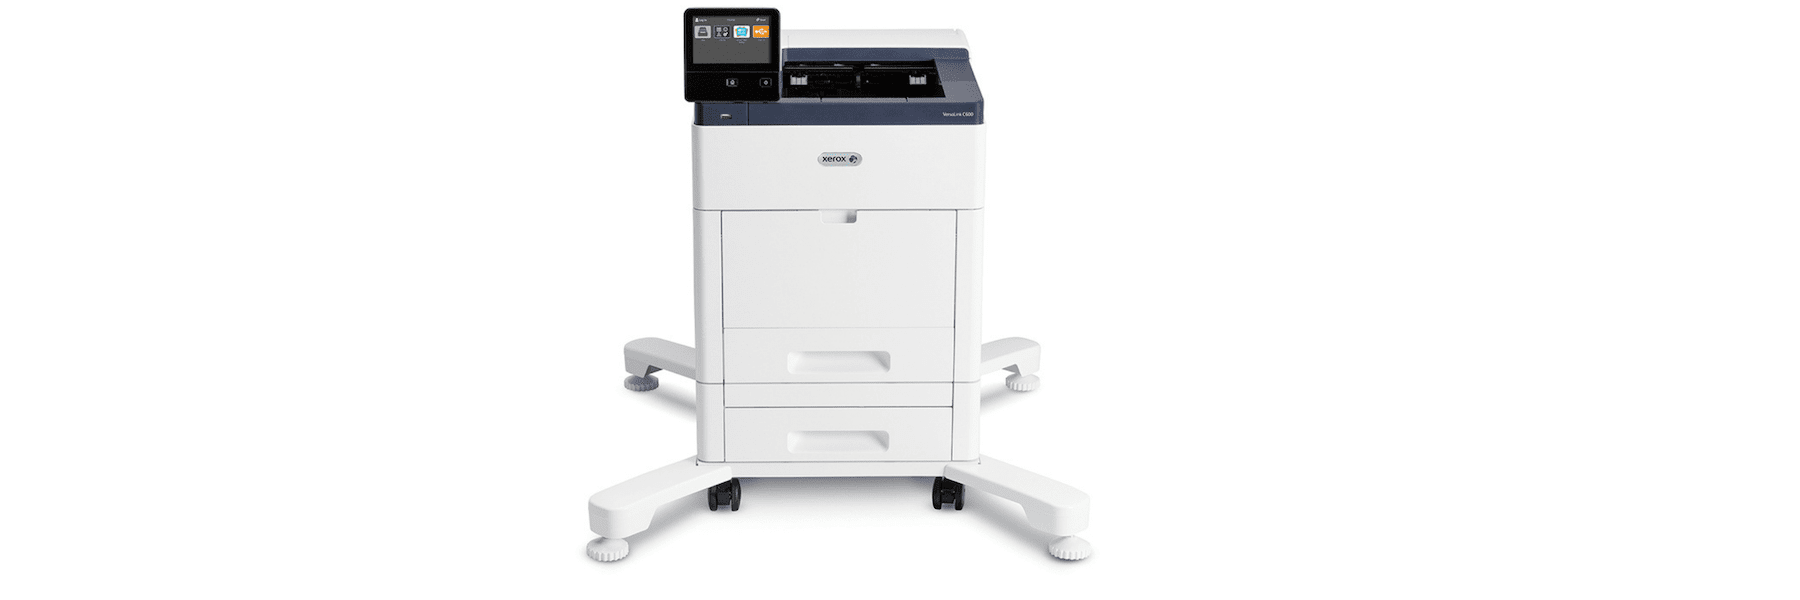 The Xerox VersaLink C600 with a stand 